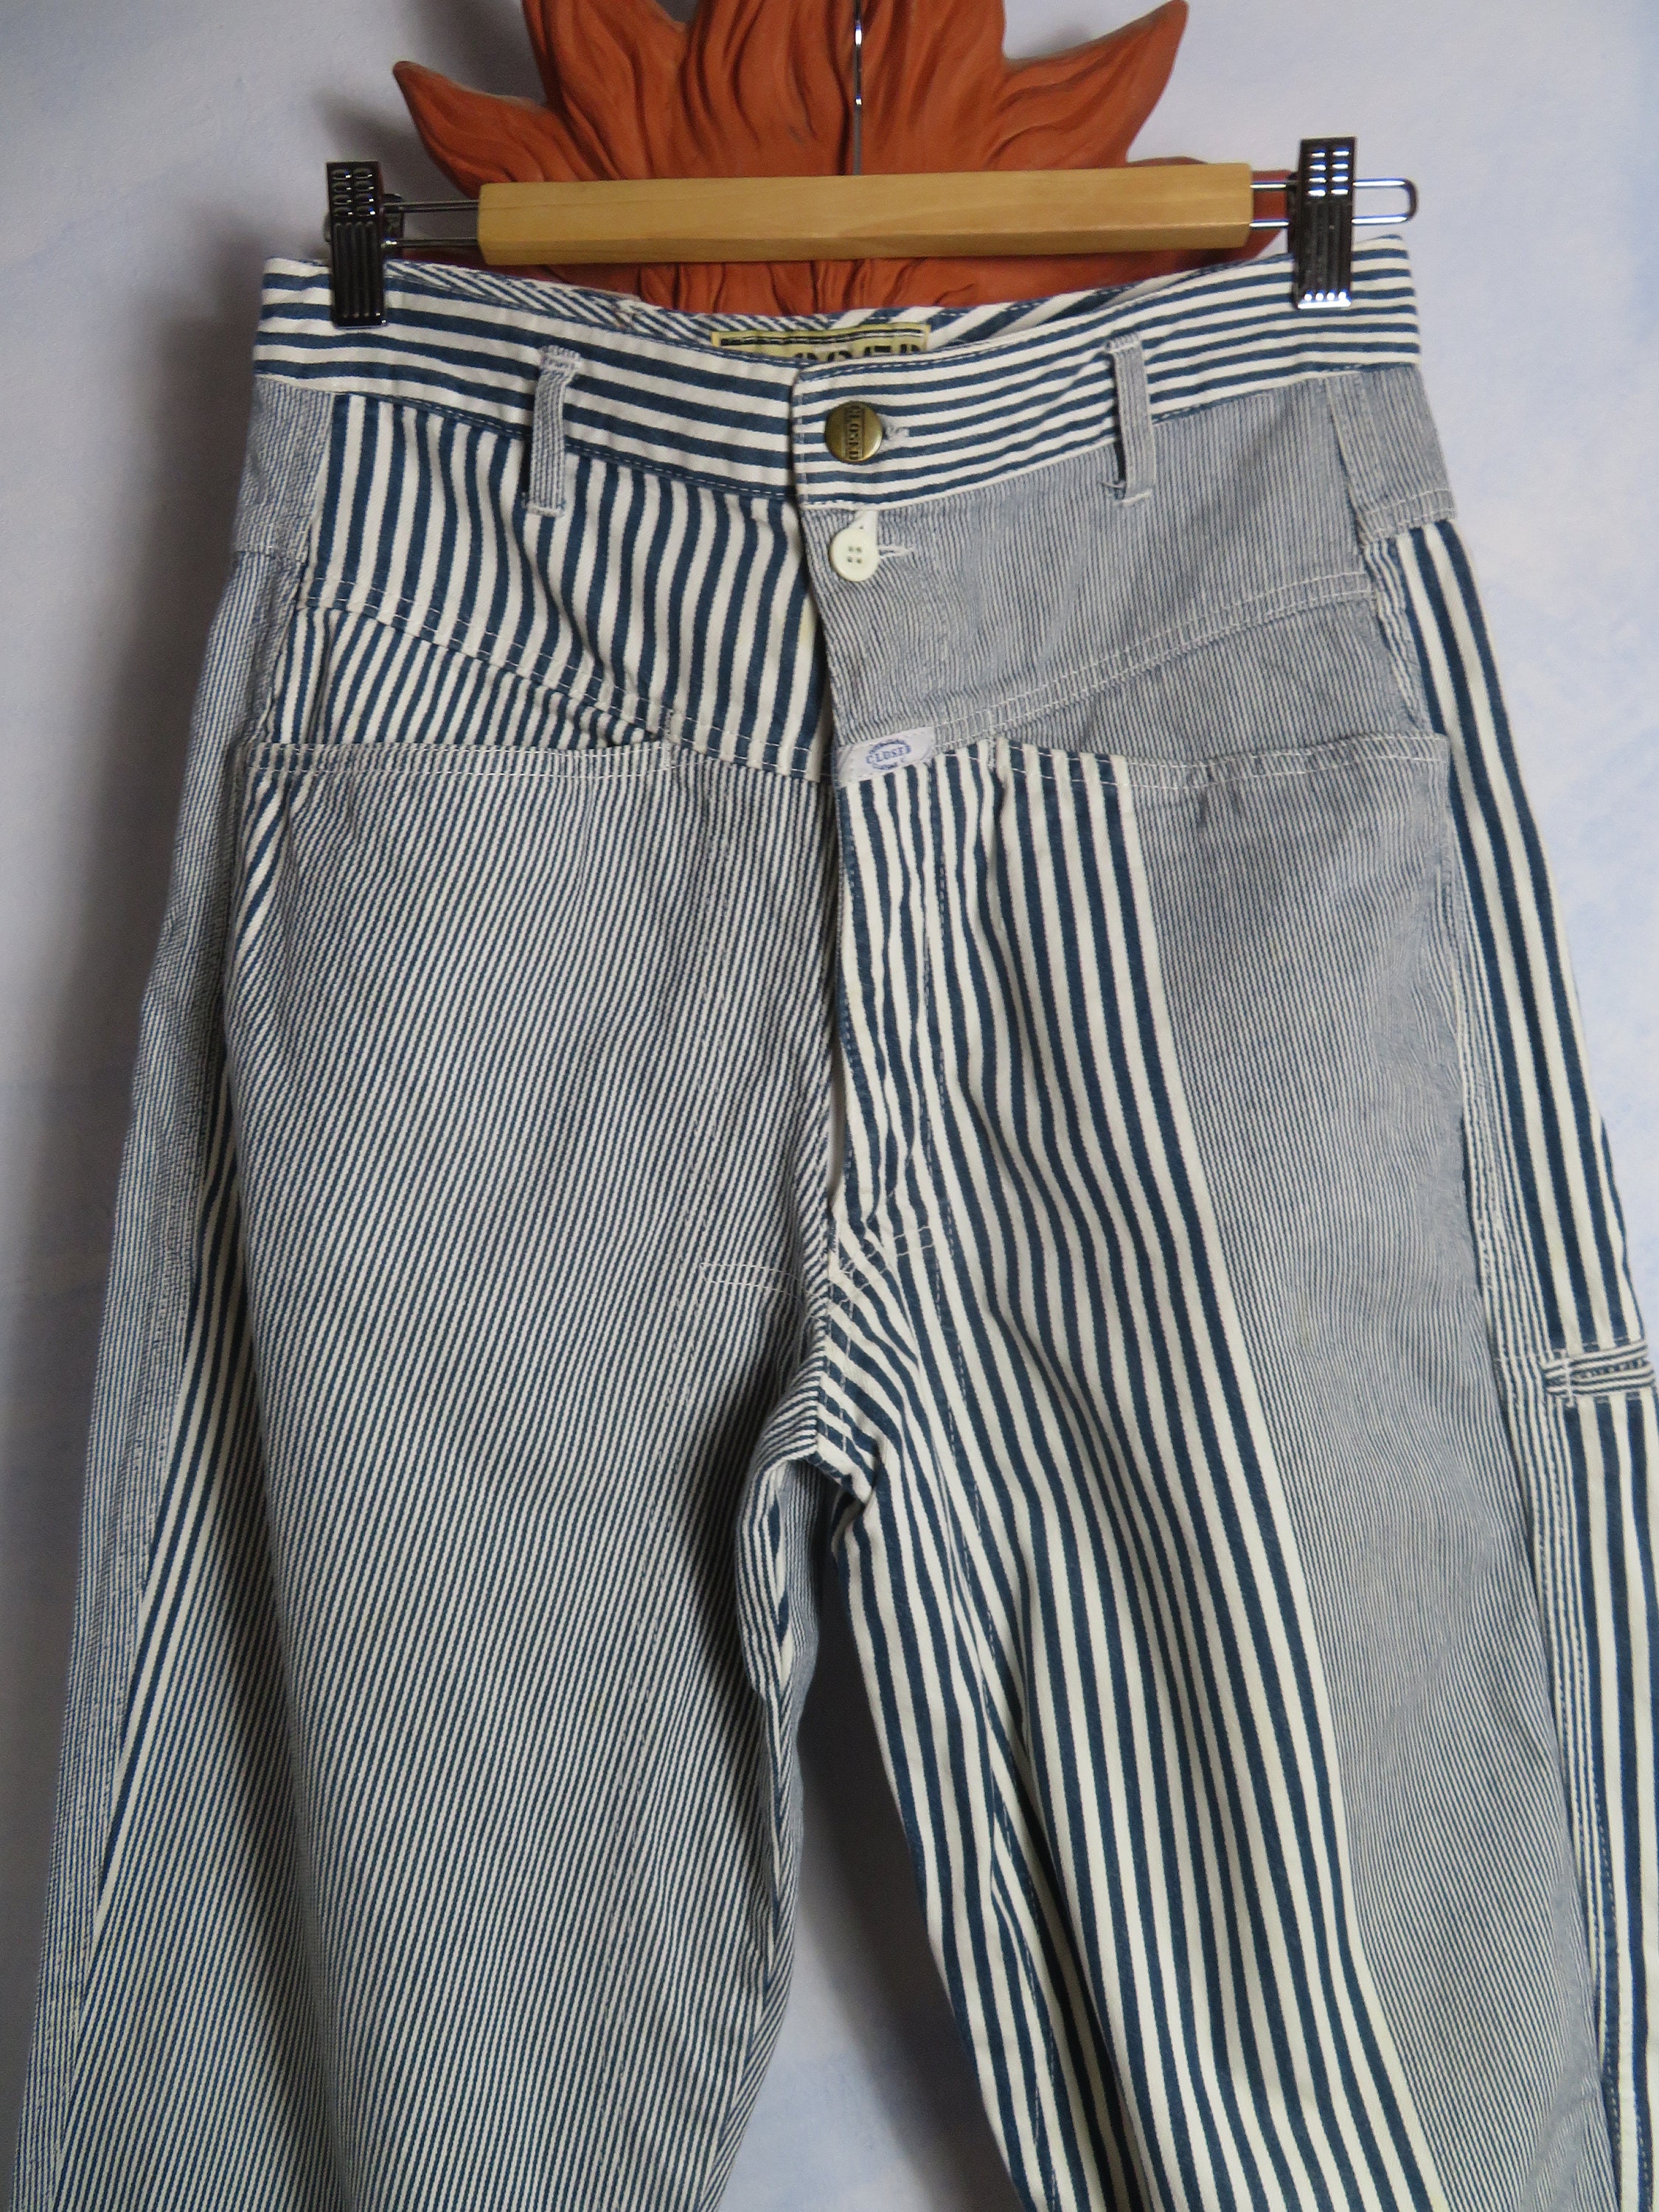 Marithe Francoise Girbaud X Closed Jeans Pants Size It 46/meter/30 Inch  Blue White Stripes Denim Jeans High Waist Mom Dad Carrot Jeans 90s 